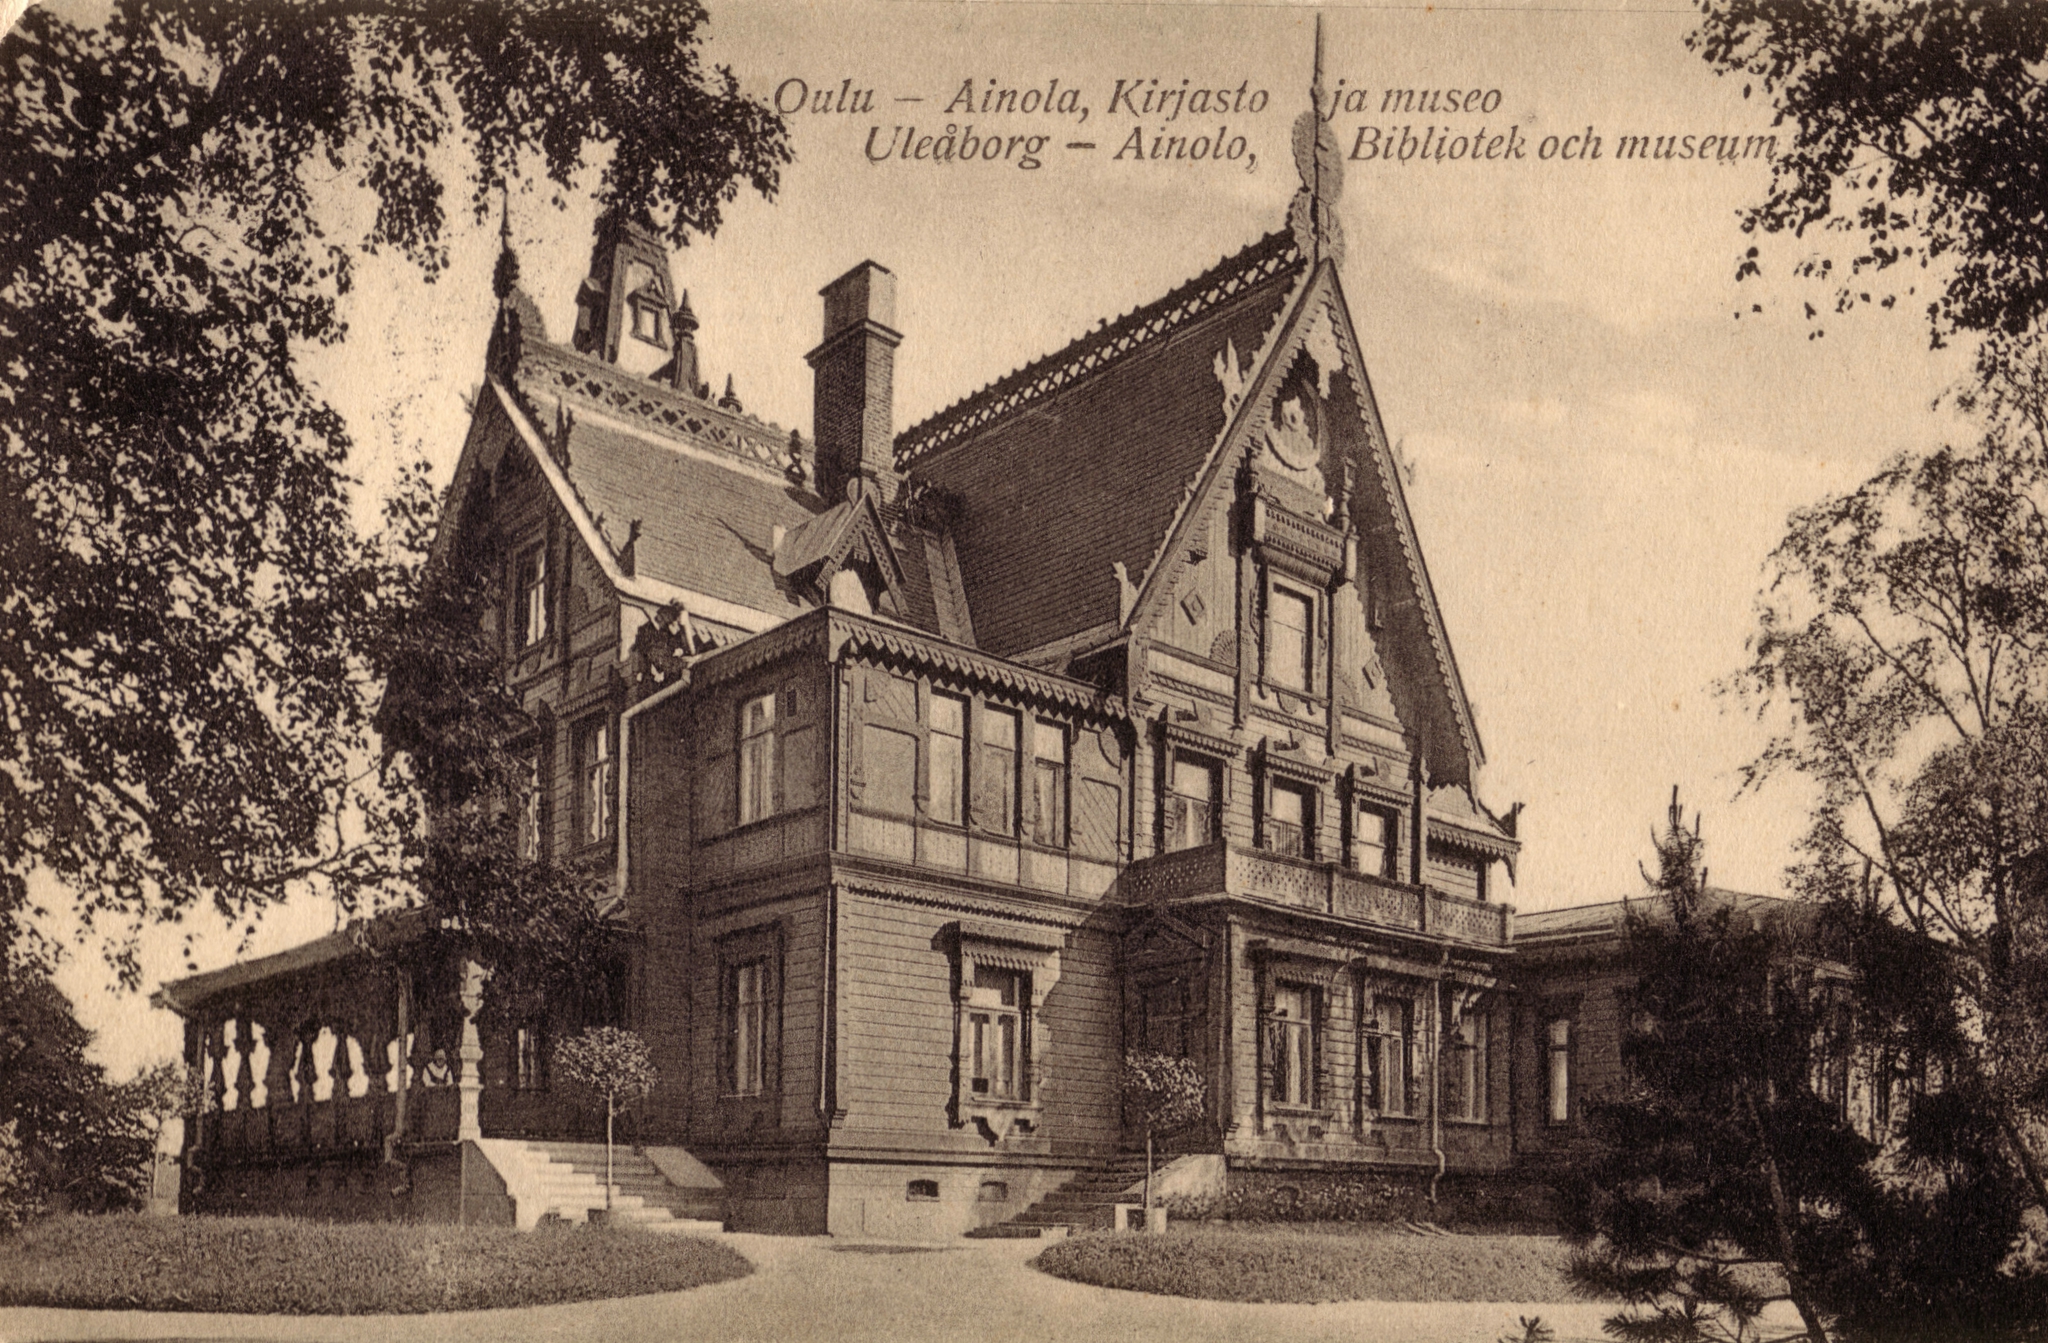 Ainola Museum Oulu pre 1929 - a postcard of Ainola museum and library. It was designed by Swedish architect J. e. Stenberg and completed in 1888. The building was destroyed in a fire in 1929.